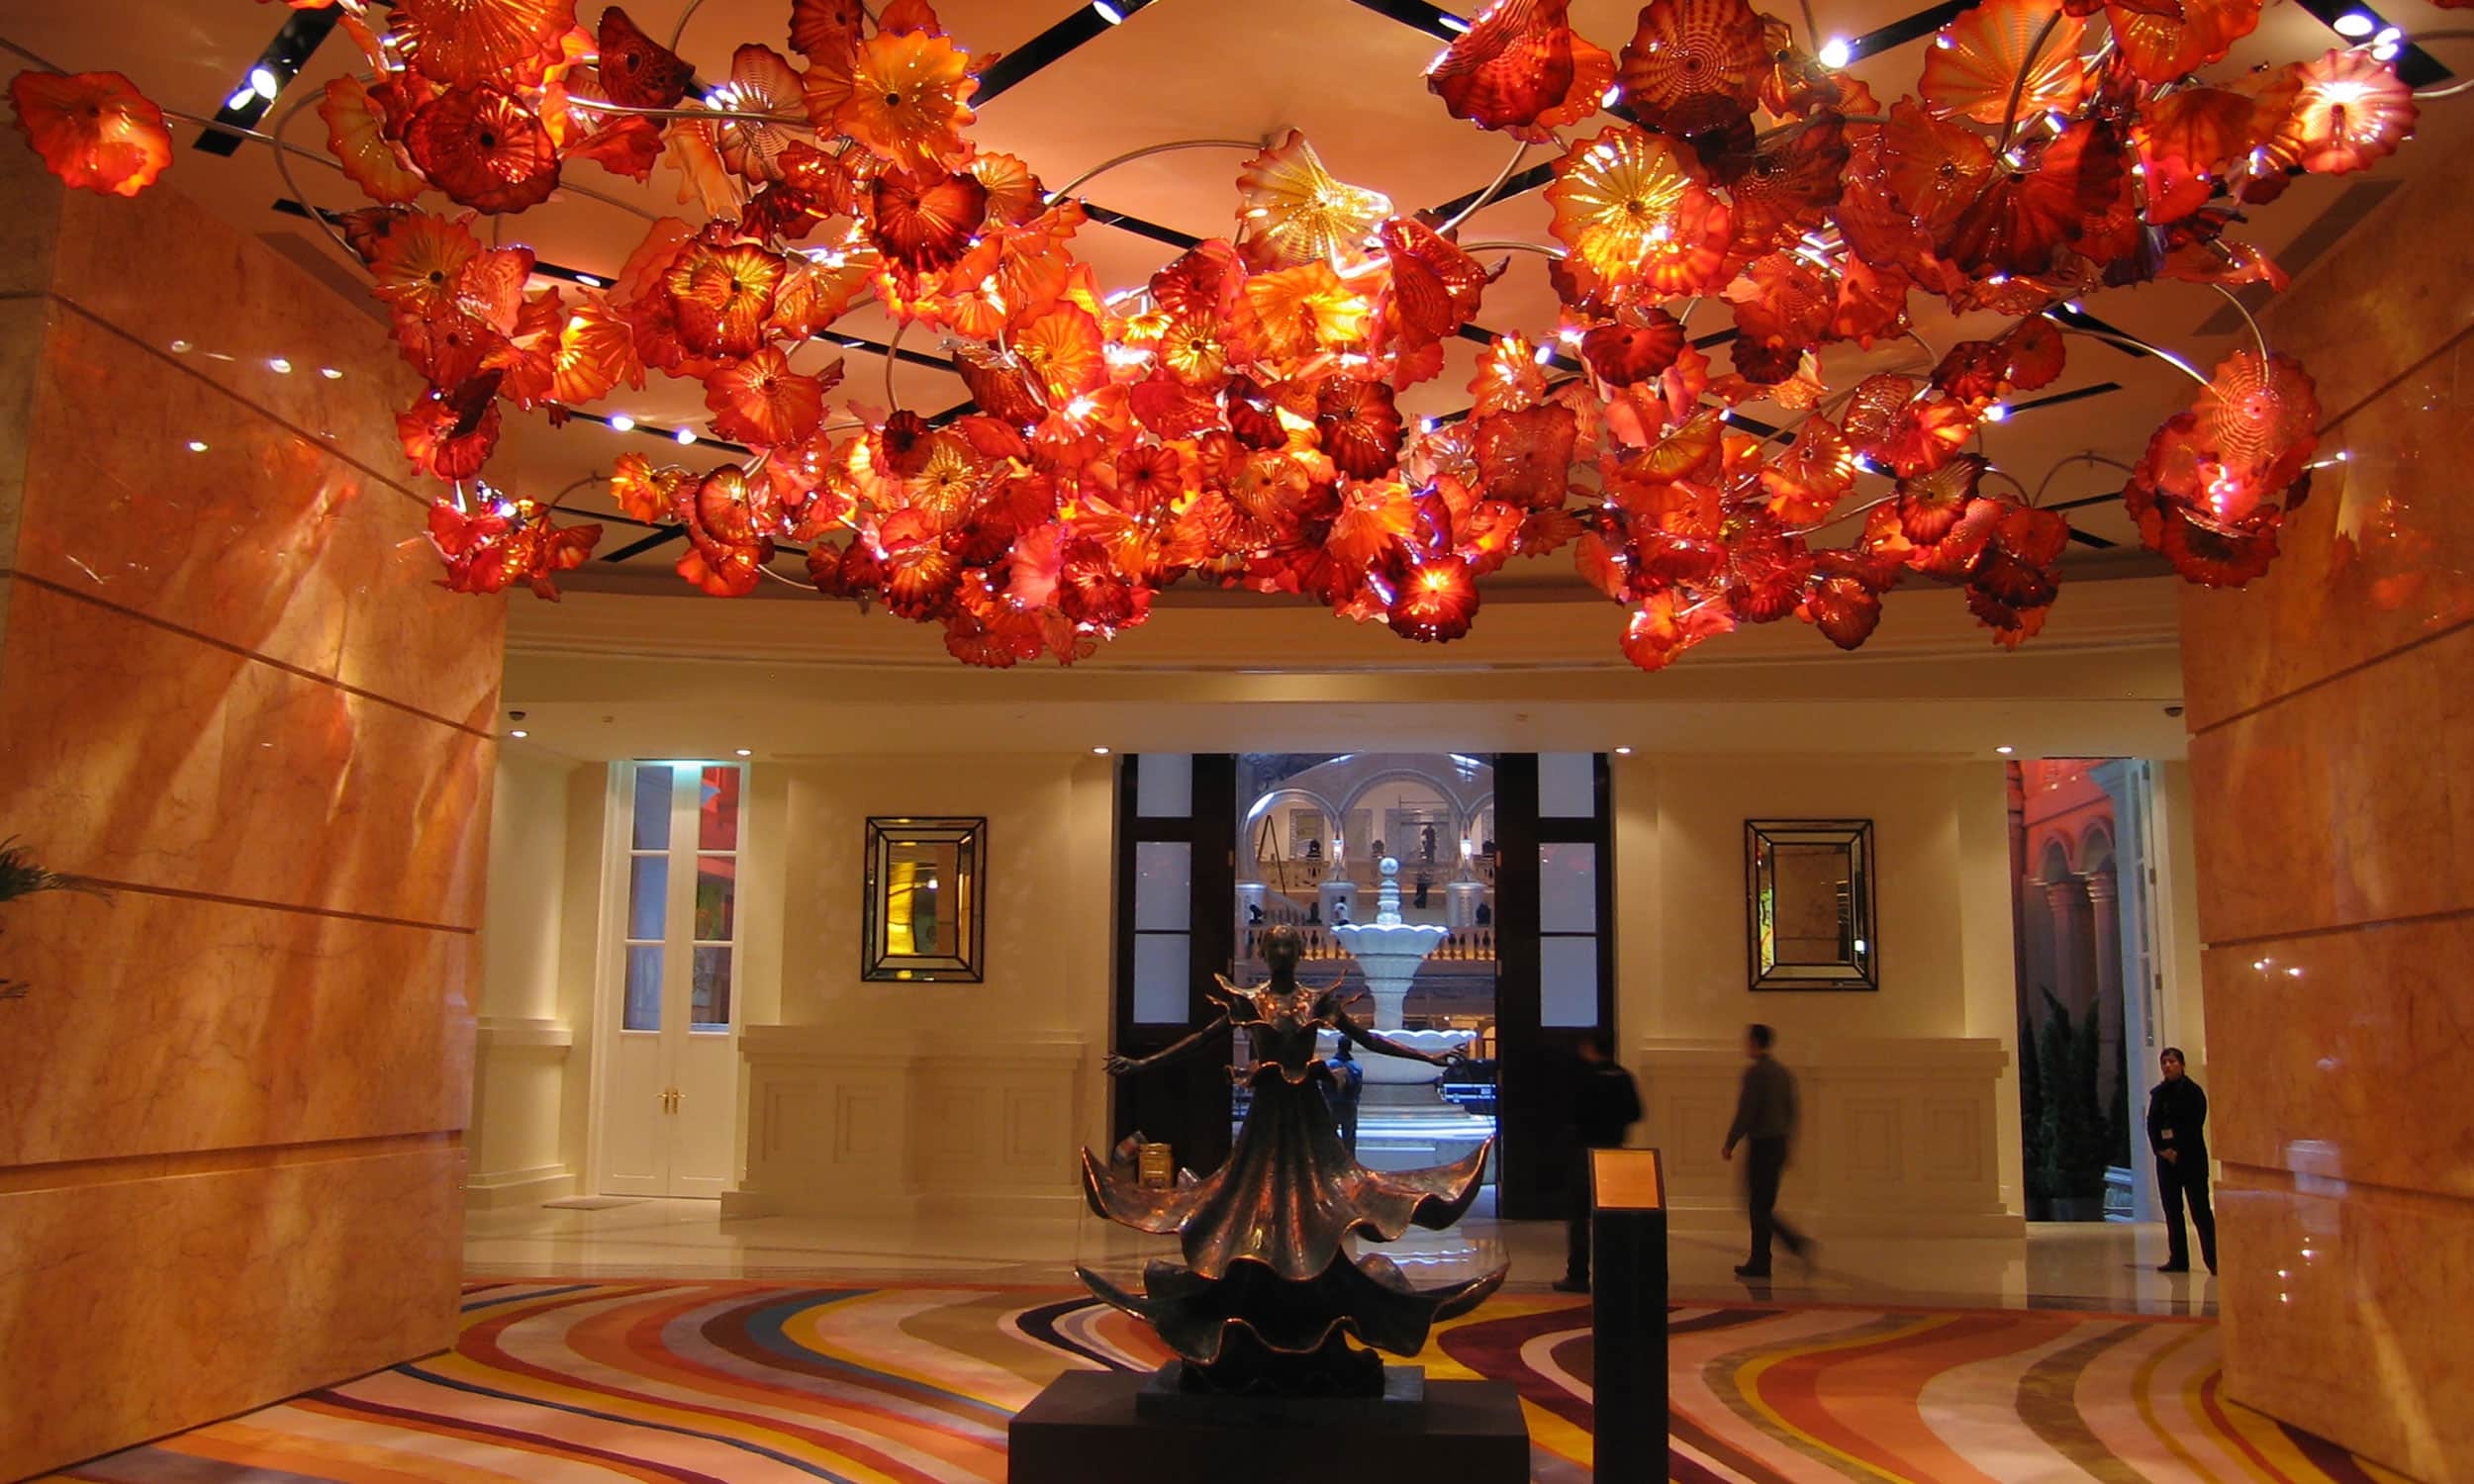 The art piece in the entry way at the MGM Grand Macau in China and its accompanying lighting